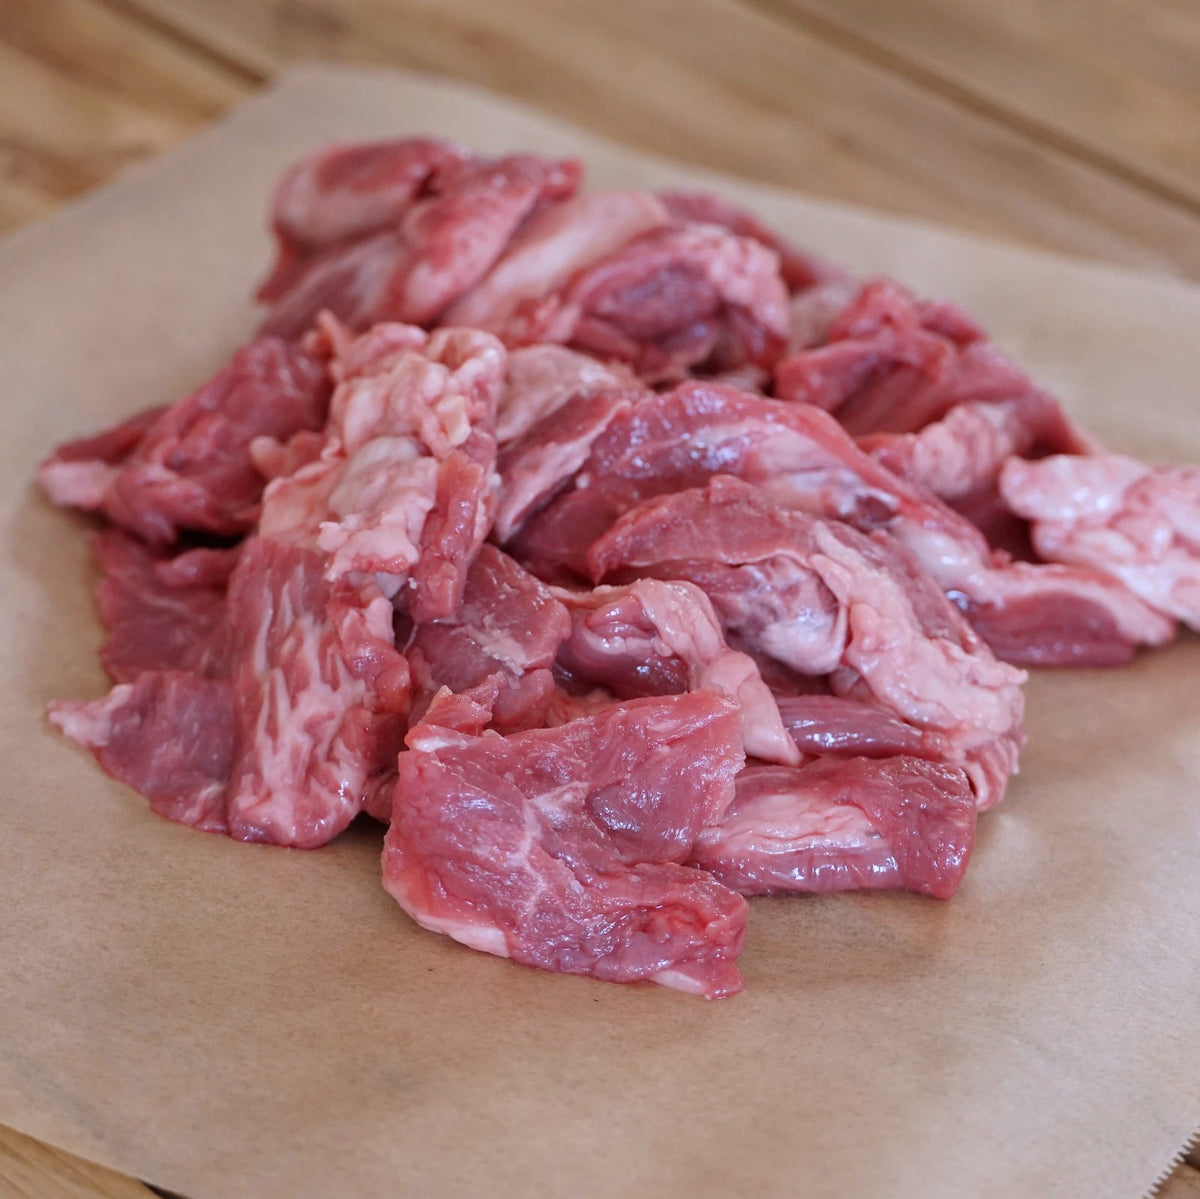 Grass-Fed Pasture-Raised Beef Trimmings and Cuts (250g) - Horizon Farms